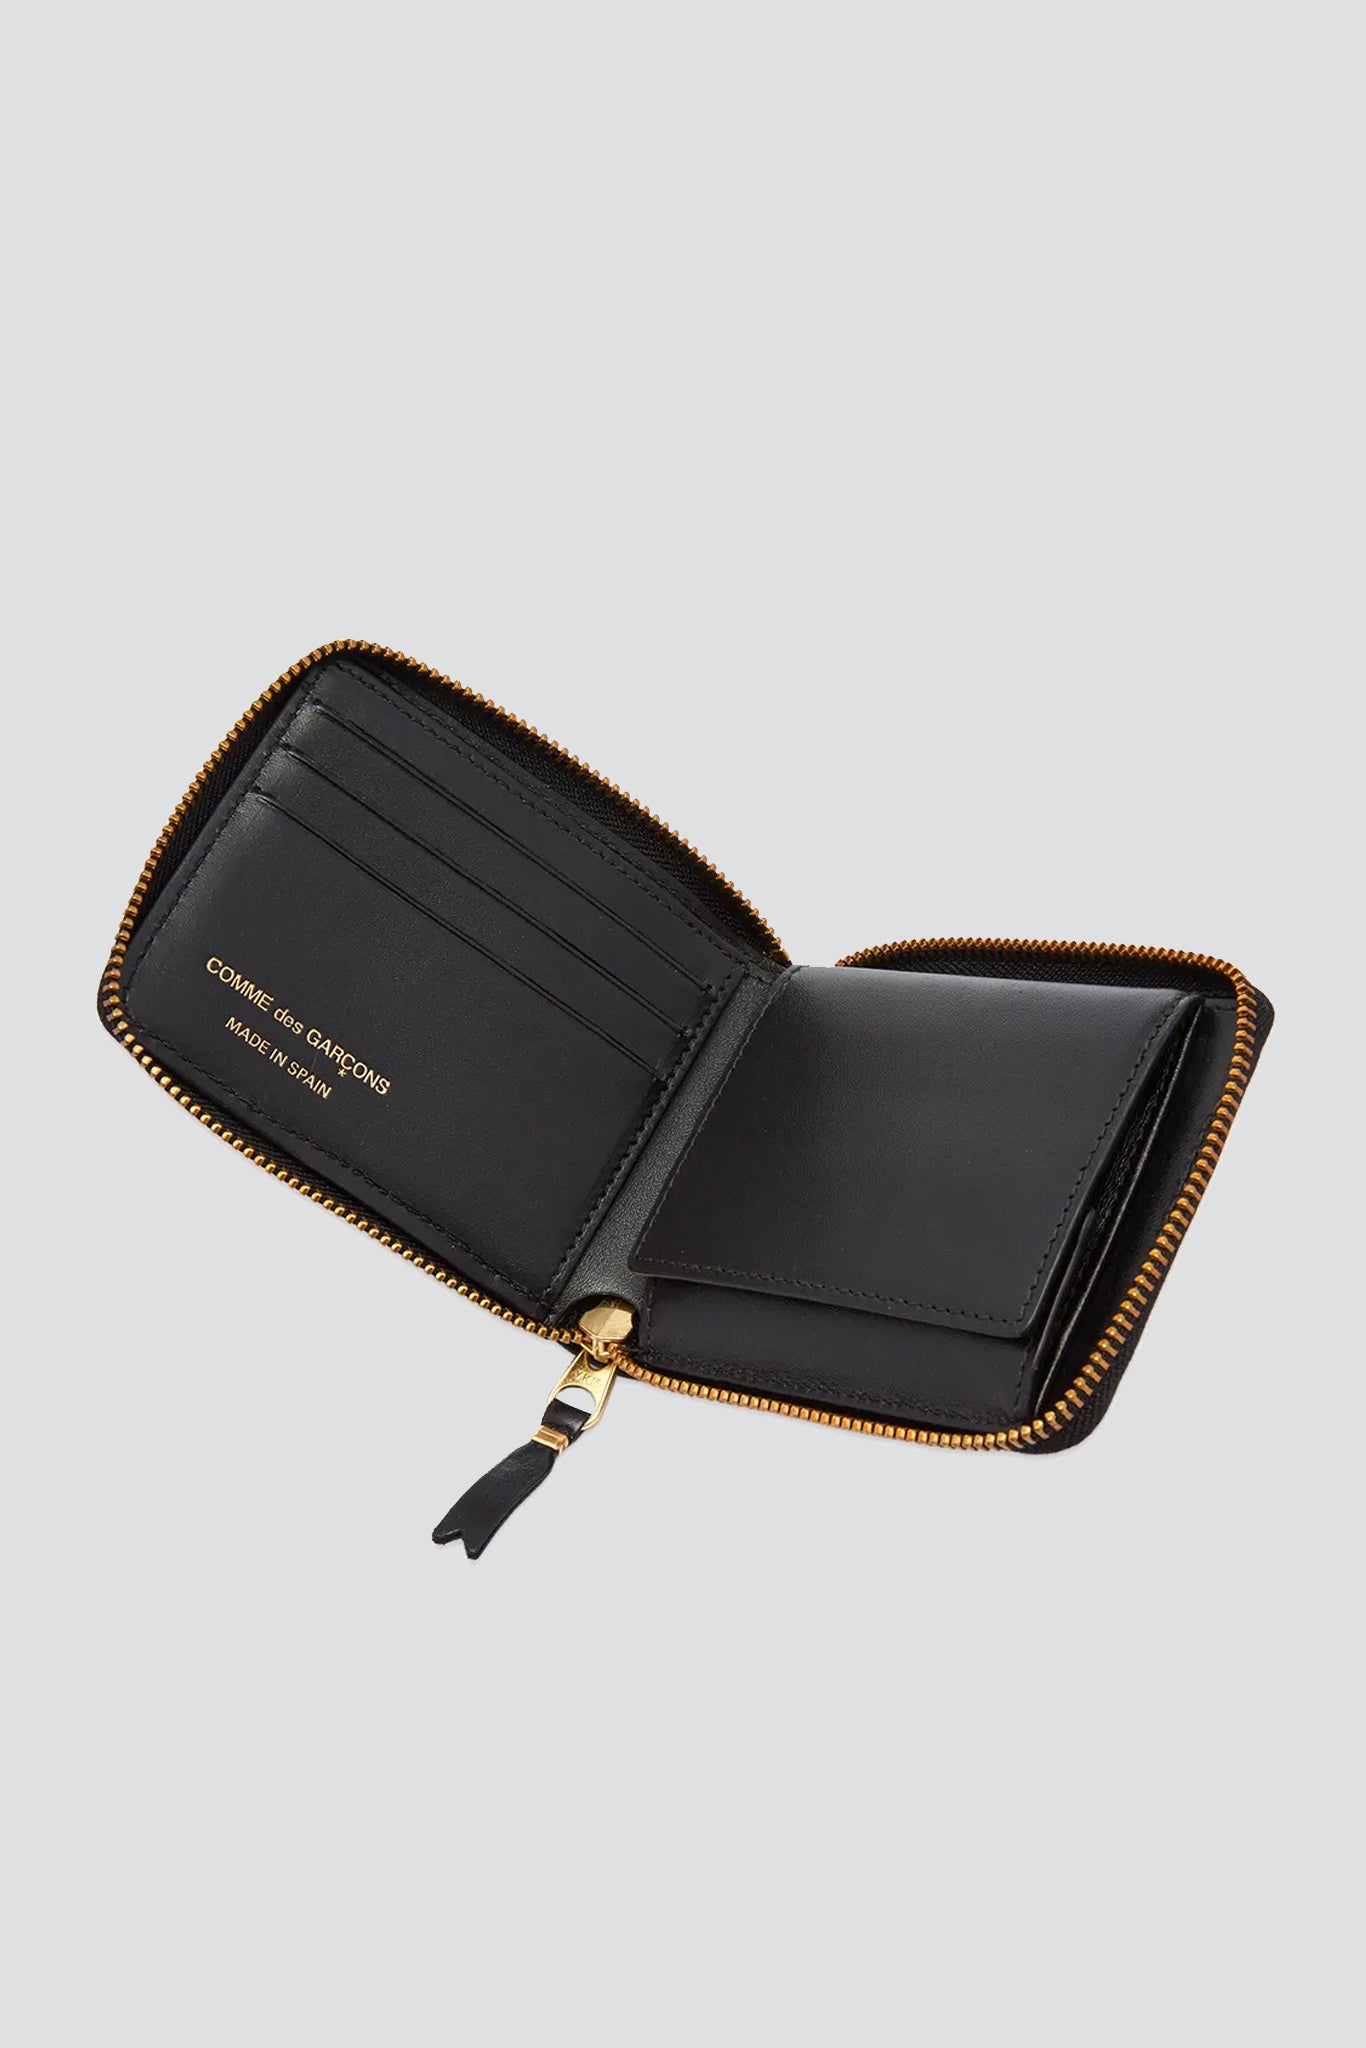 Classic Leather Wallet - Black - SA7100